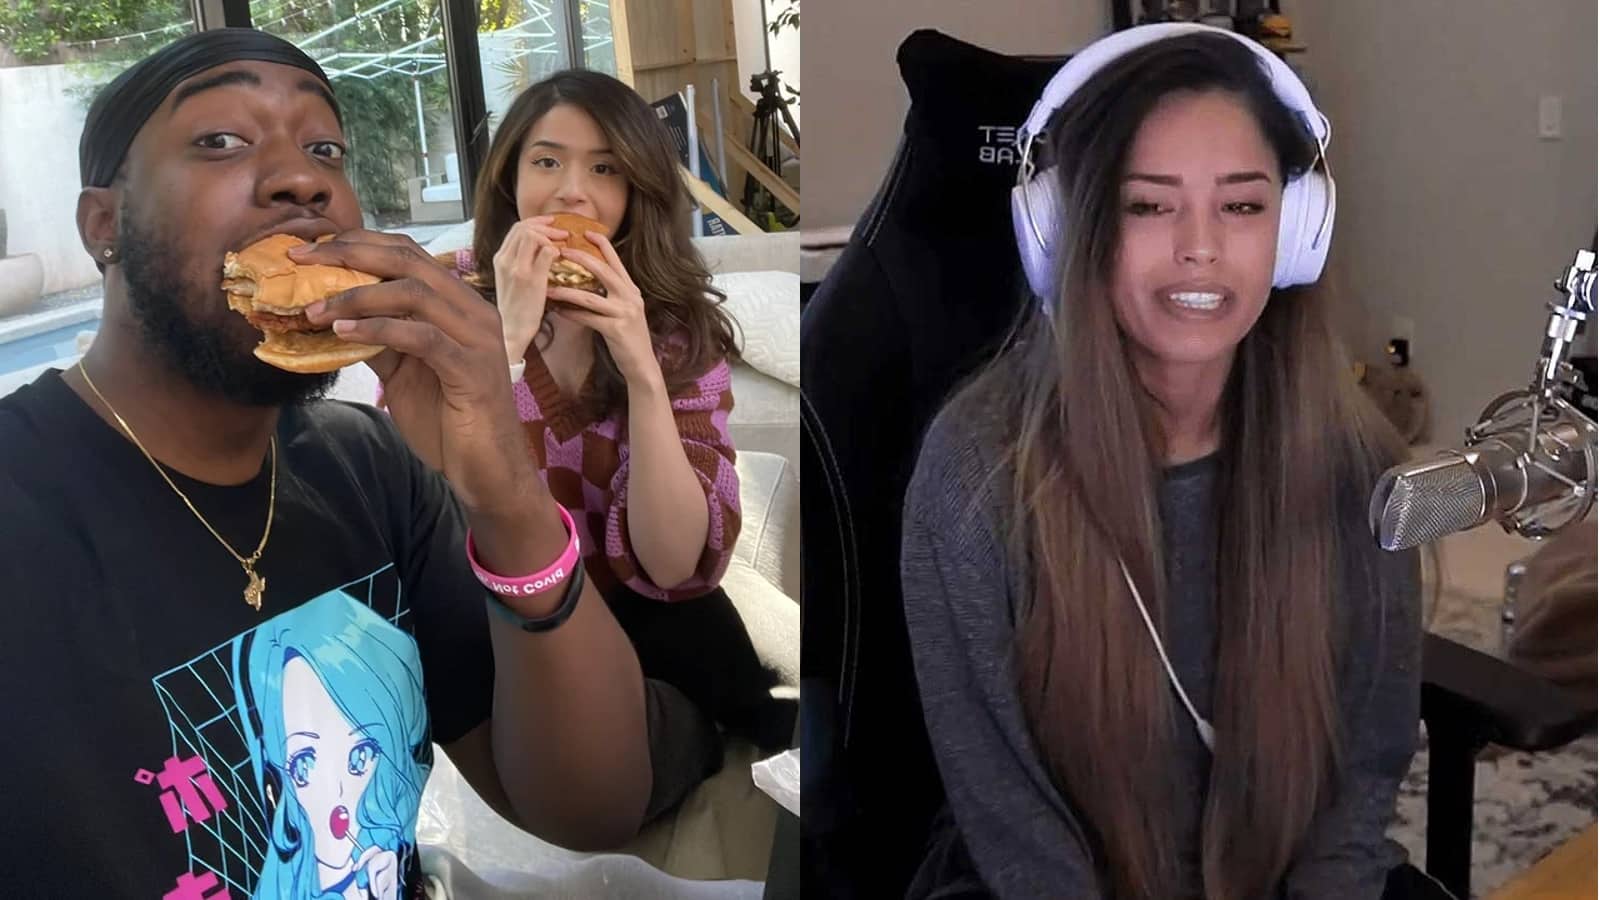 Pokimane and Jidion eating burgers on one side, with Valkyrae streaming on the other